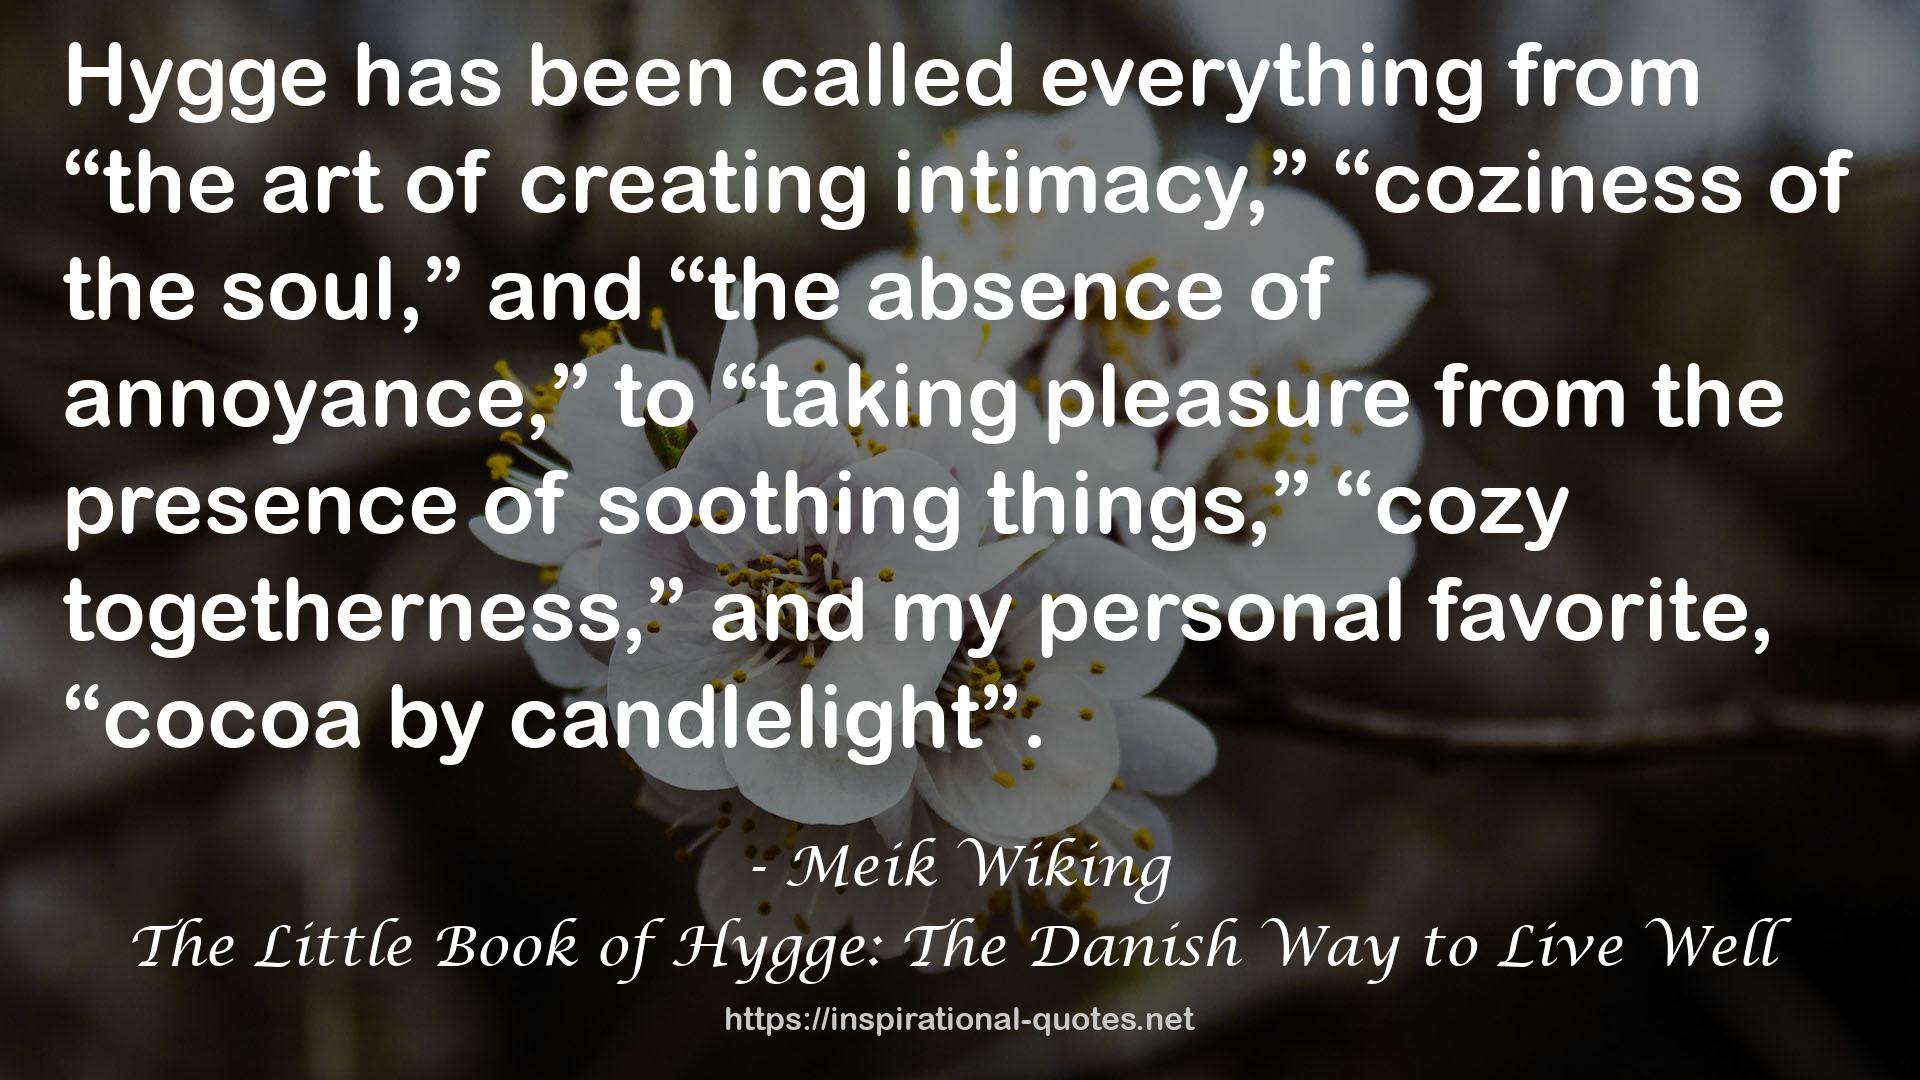 The Little Book of Hygge: The Danish Way to Live Well QUOTES